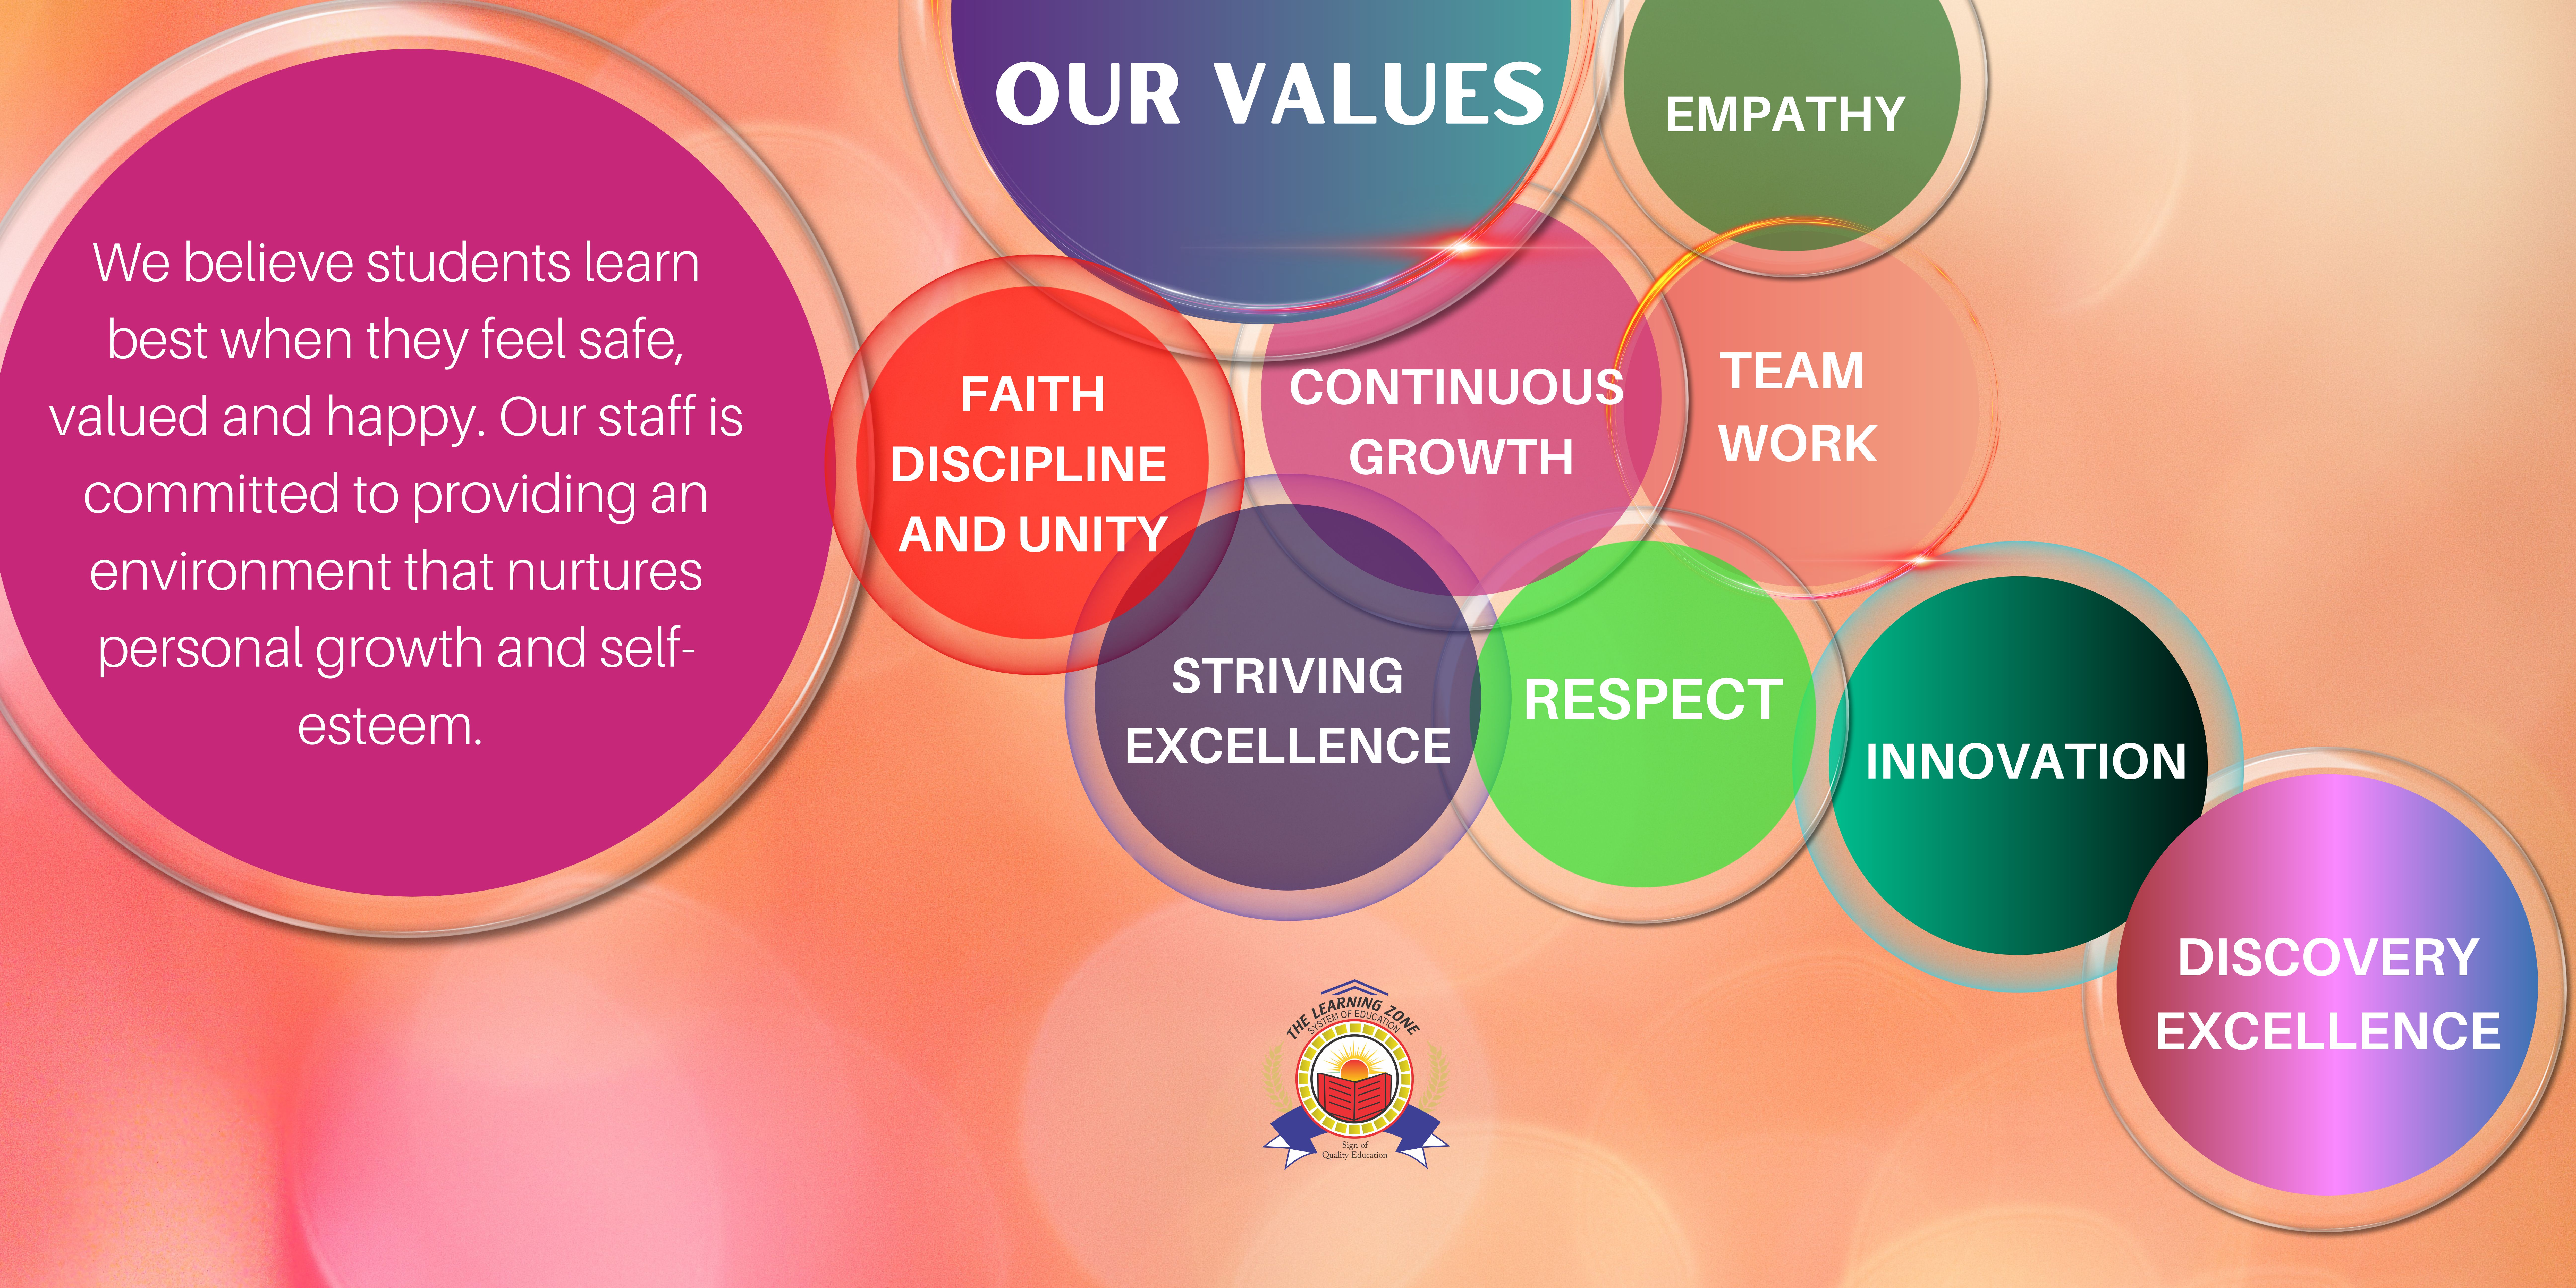 OUR VALU ES | EMPATHY

We believe students learn
best when they feel safe,
FAITH
valued and happy. Our staff is \|
or ~ DISCIPLINE

committed to providing an Js

AND UNITY
environment that nurtures
personal growth and self-

       
   
   

CONTINUOU
GROWTH

/ IIe
SIC 4 \ EXCELLENCE

py

    

RNIN,
A G
oo OF EDUC, 5%,

      
  

oY <

 
   
 

Sign of

| ad Quality Education